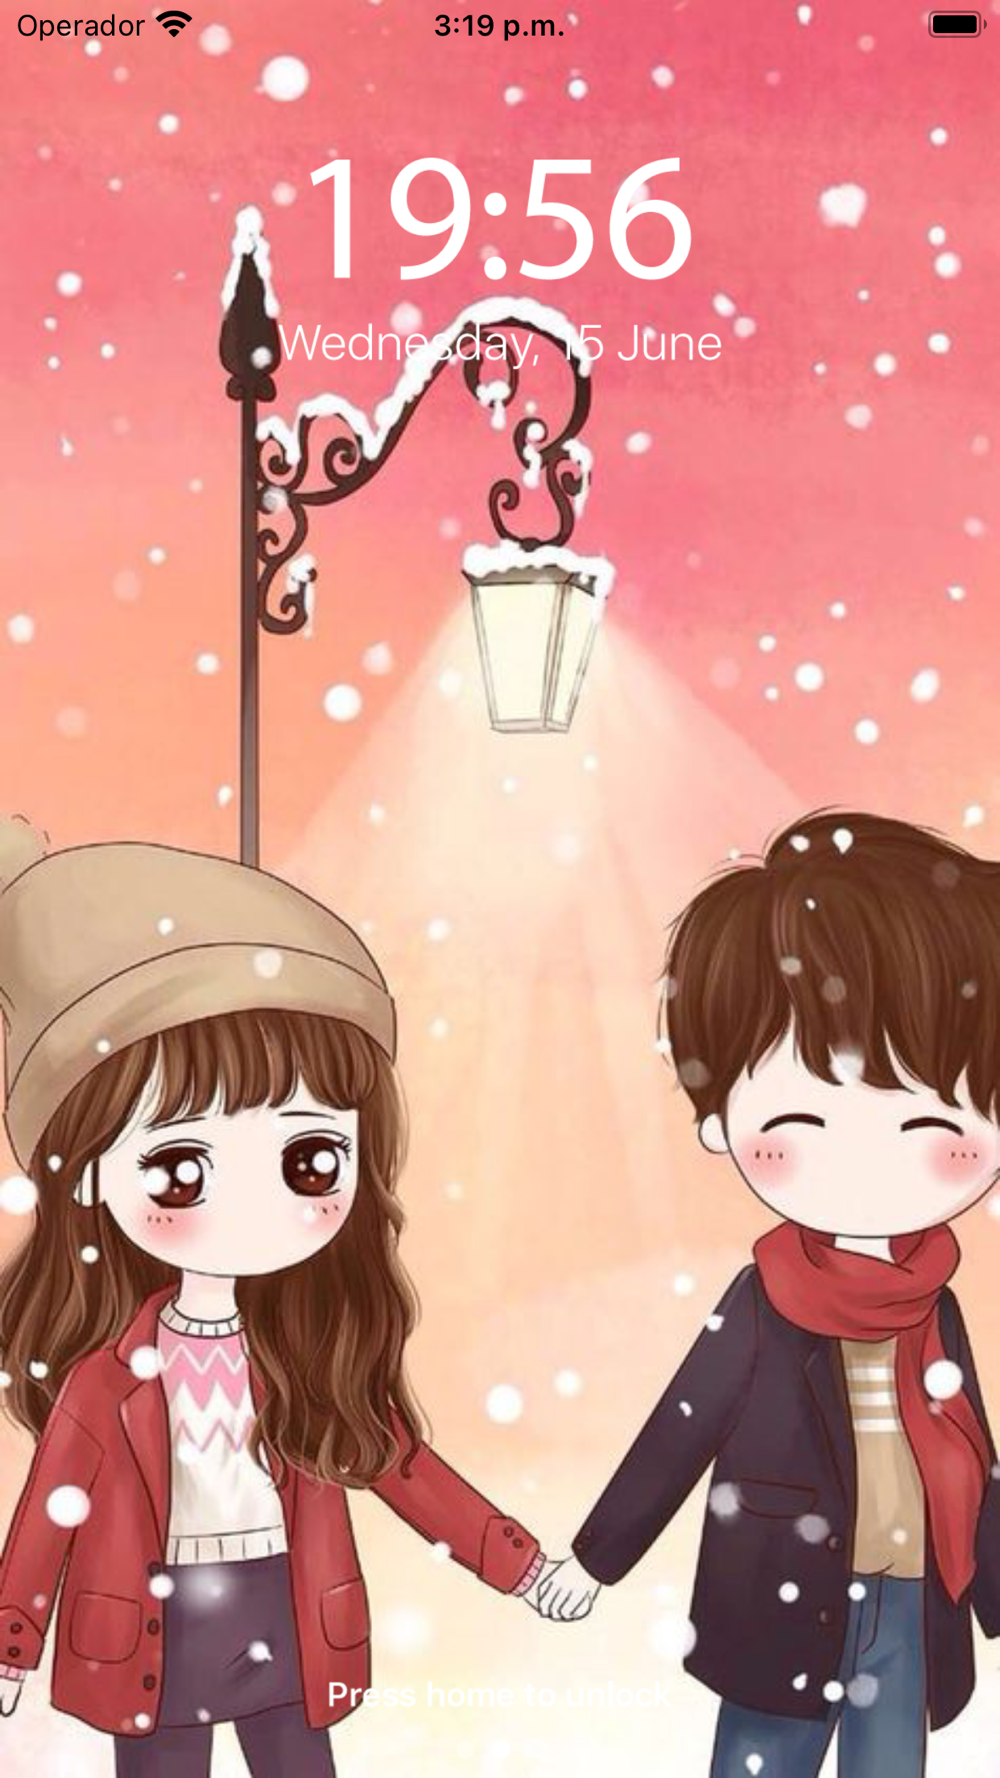 Cute Anime Couple Wallpaper Free Download App for iPhone 